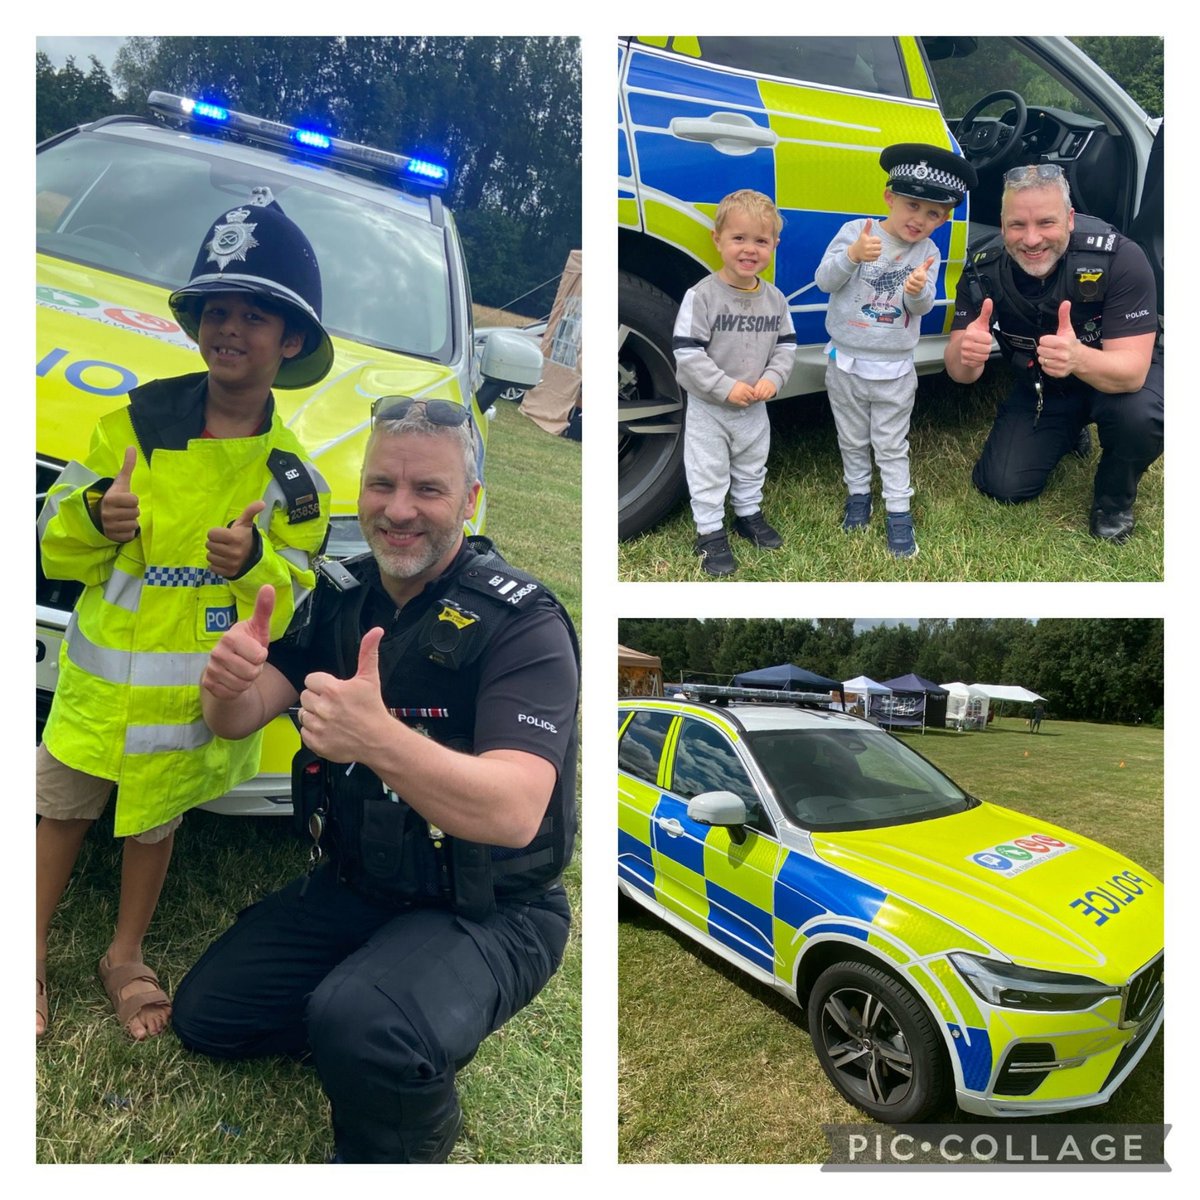 Absolutely great to see Special Sargeant Hickinbottom out today at a local community event.
Amazing to build those ties between police and the community!

#SouthStaffordshire #SpecialContribution